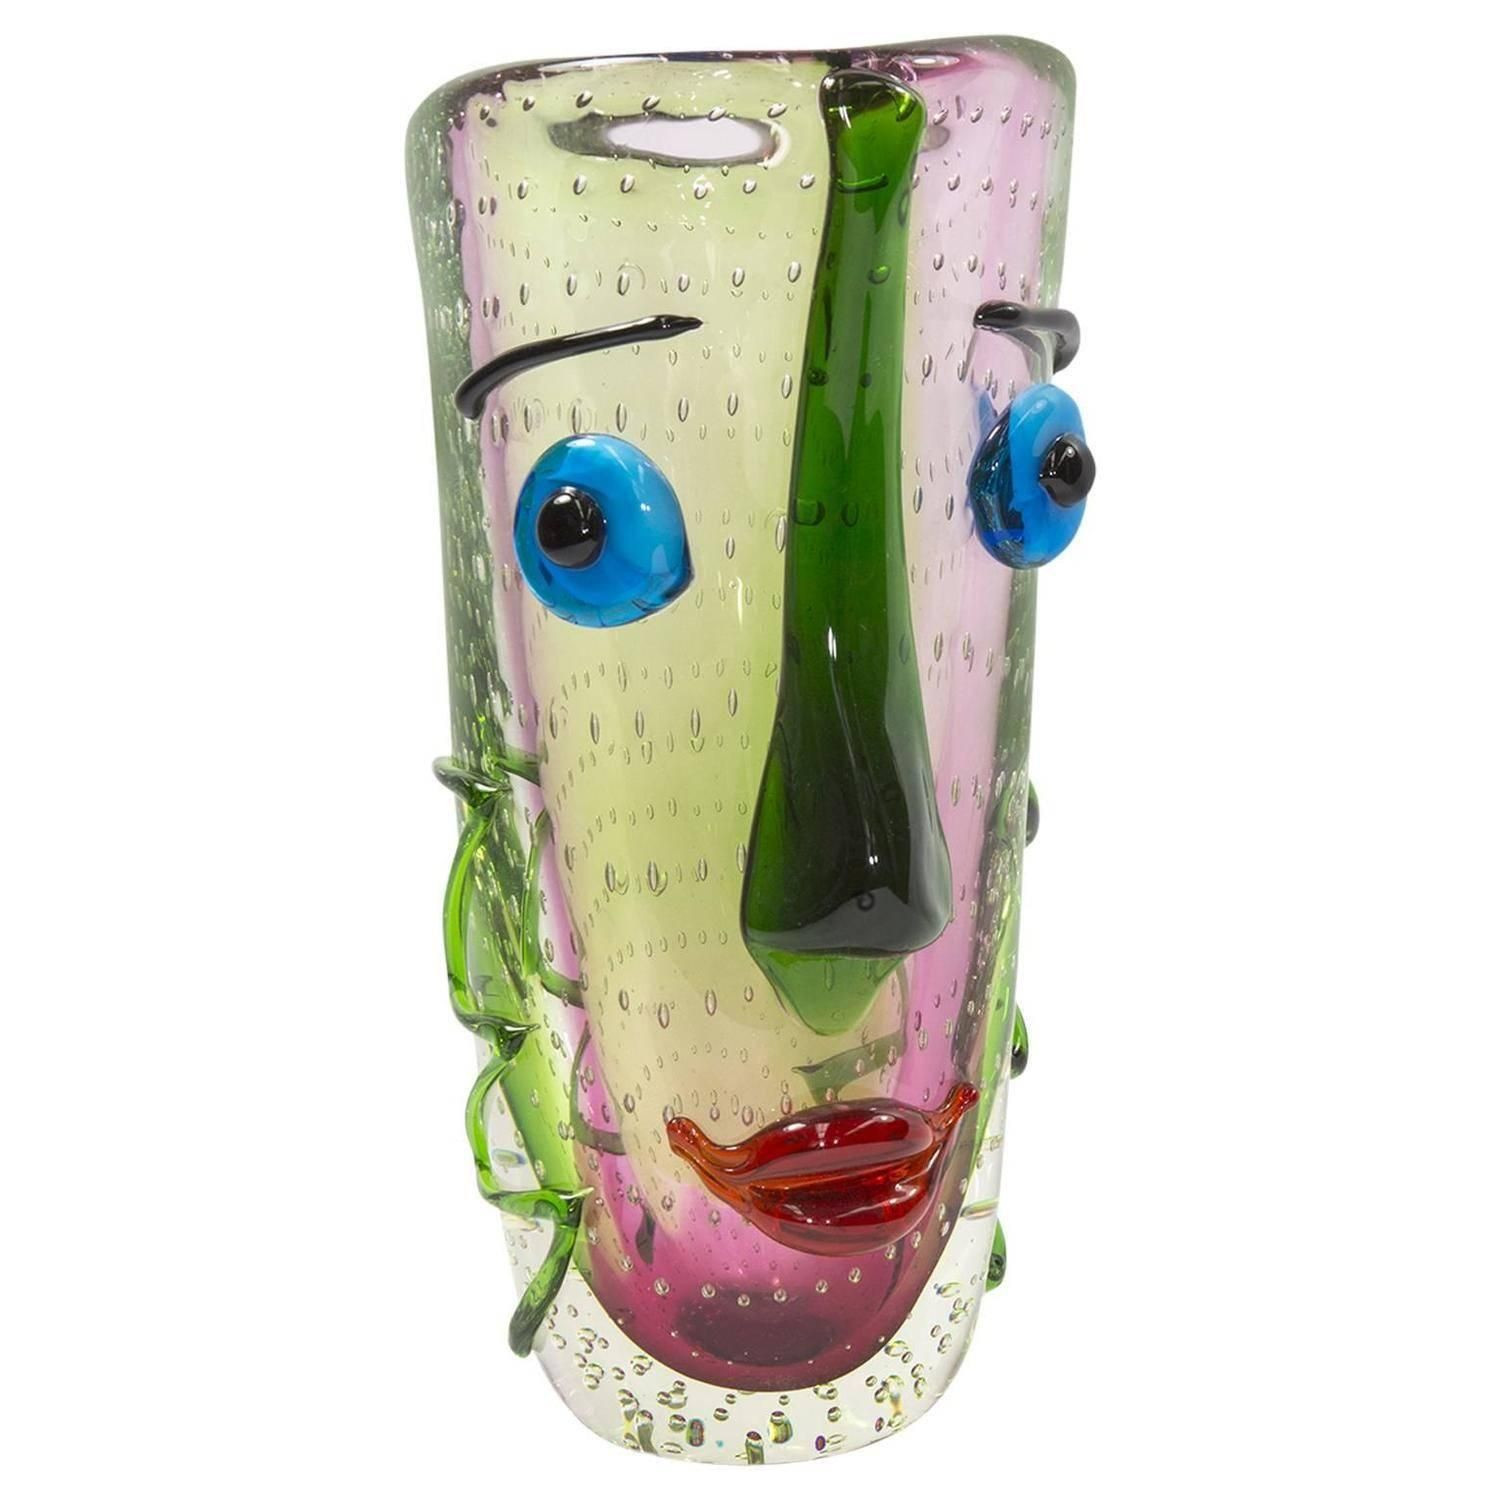 30 Perfect Large Green Glass Vase 2024 free download large green glass vase of fabulous large murano multicolored abstract picasso face art glass in fabulous large murano multicolored abstract picasso face art glass vase murano glass glass vas